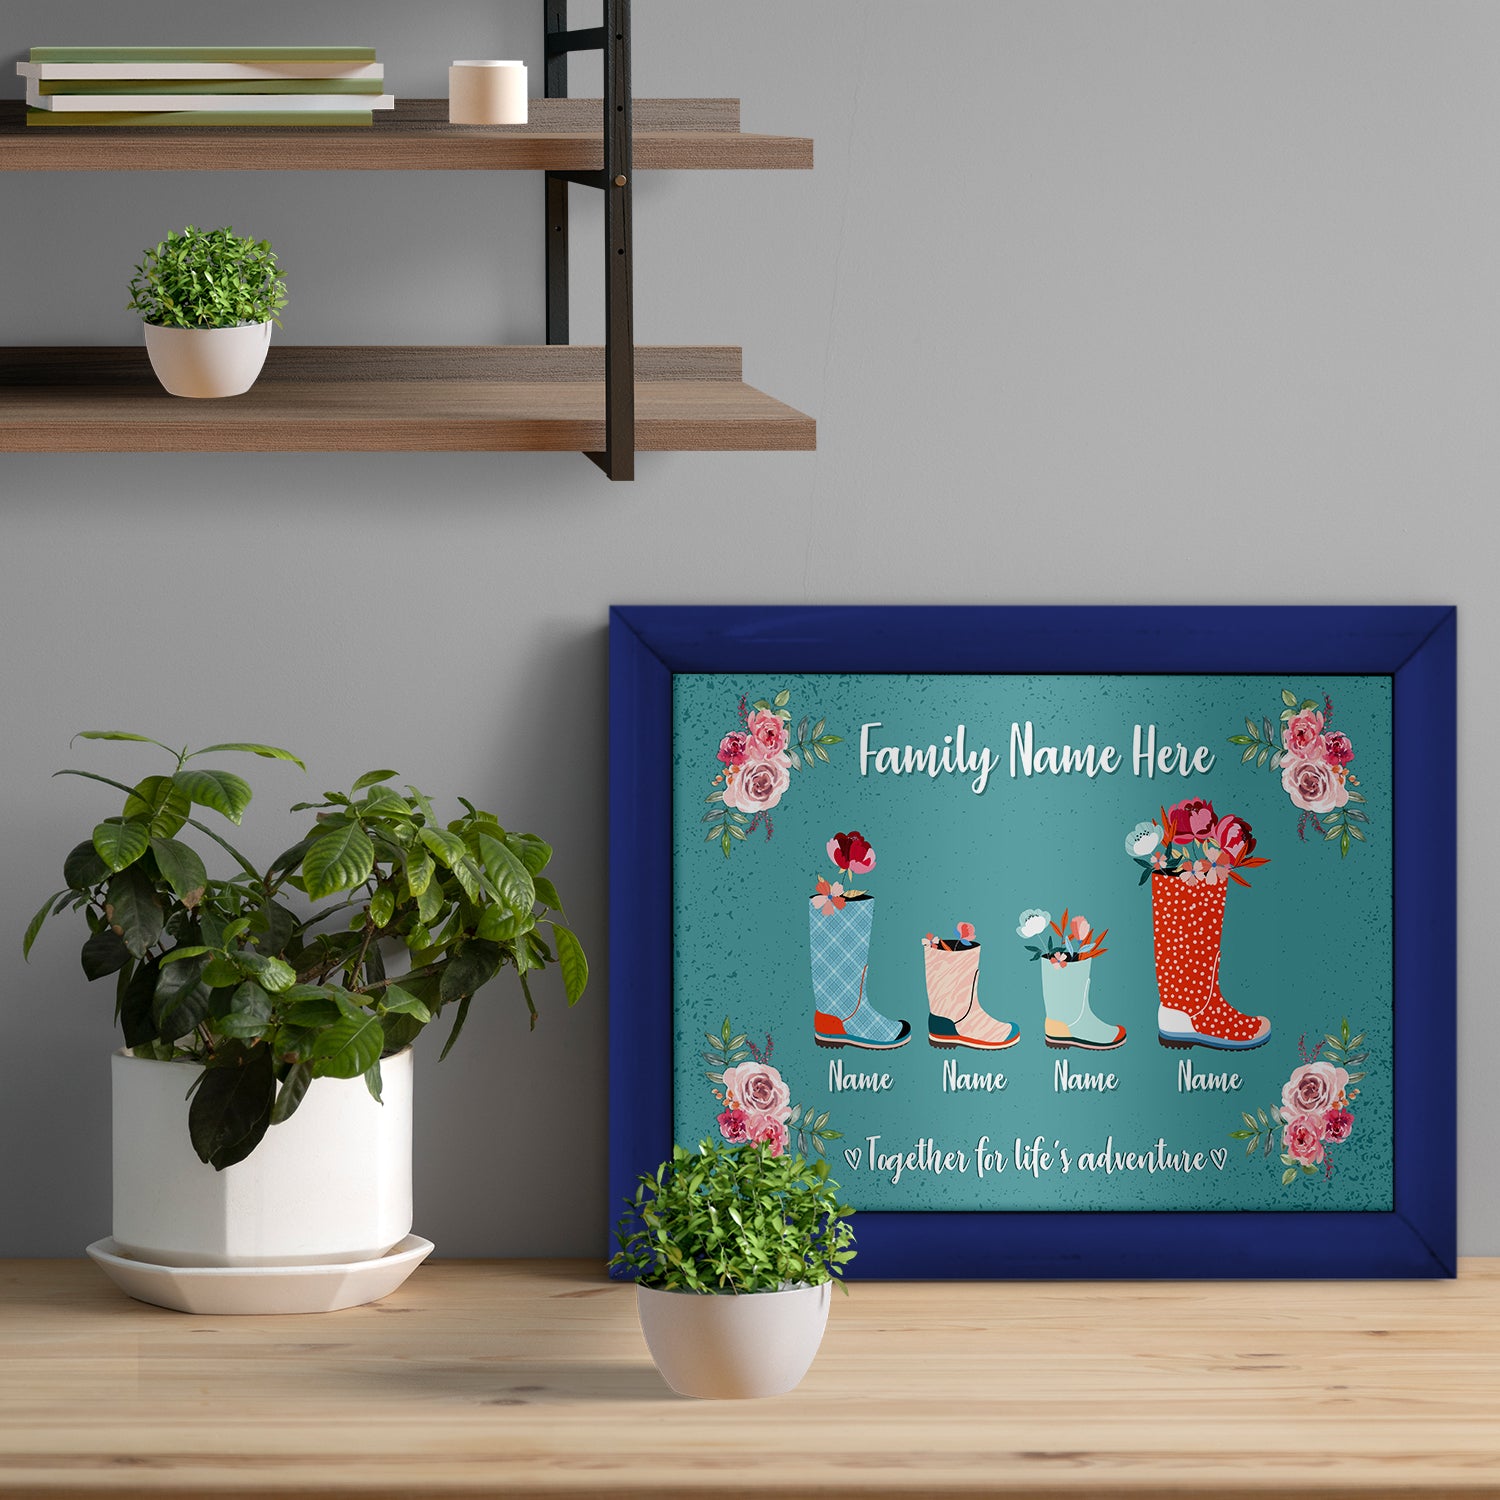 Personalised Family of 4 Wellies - A4 Metal Sign Plaque